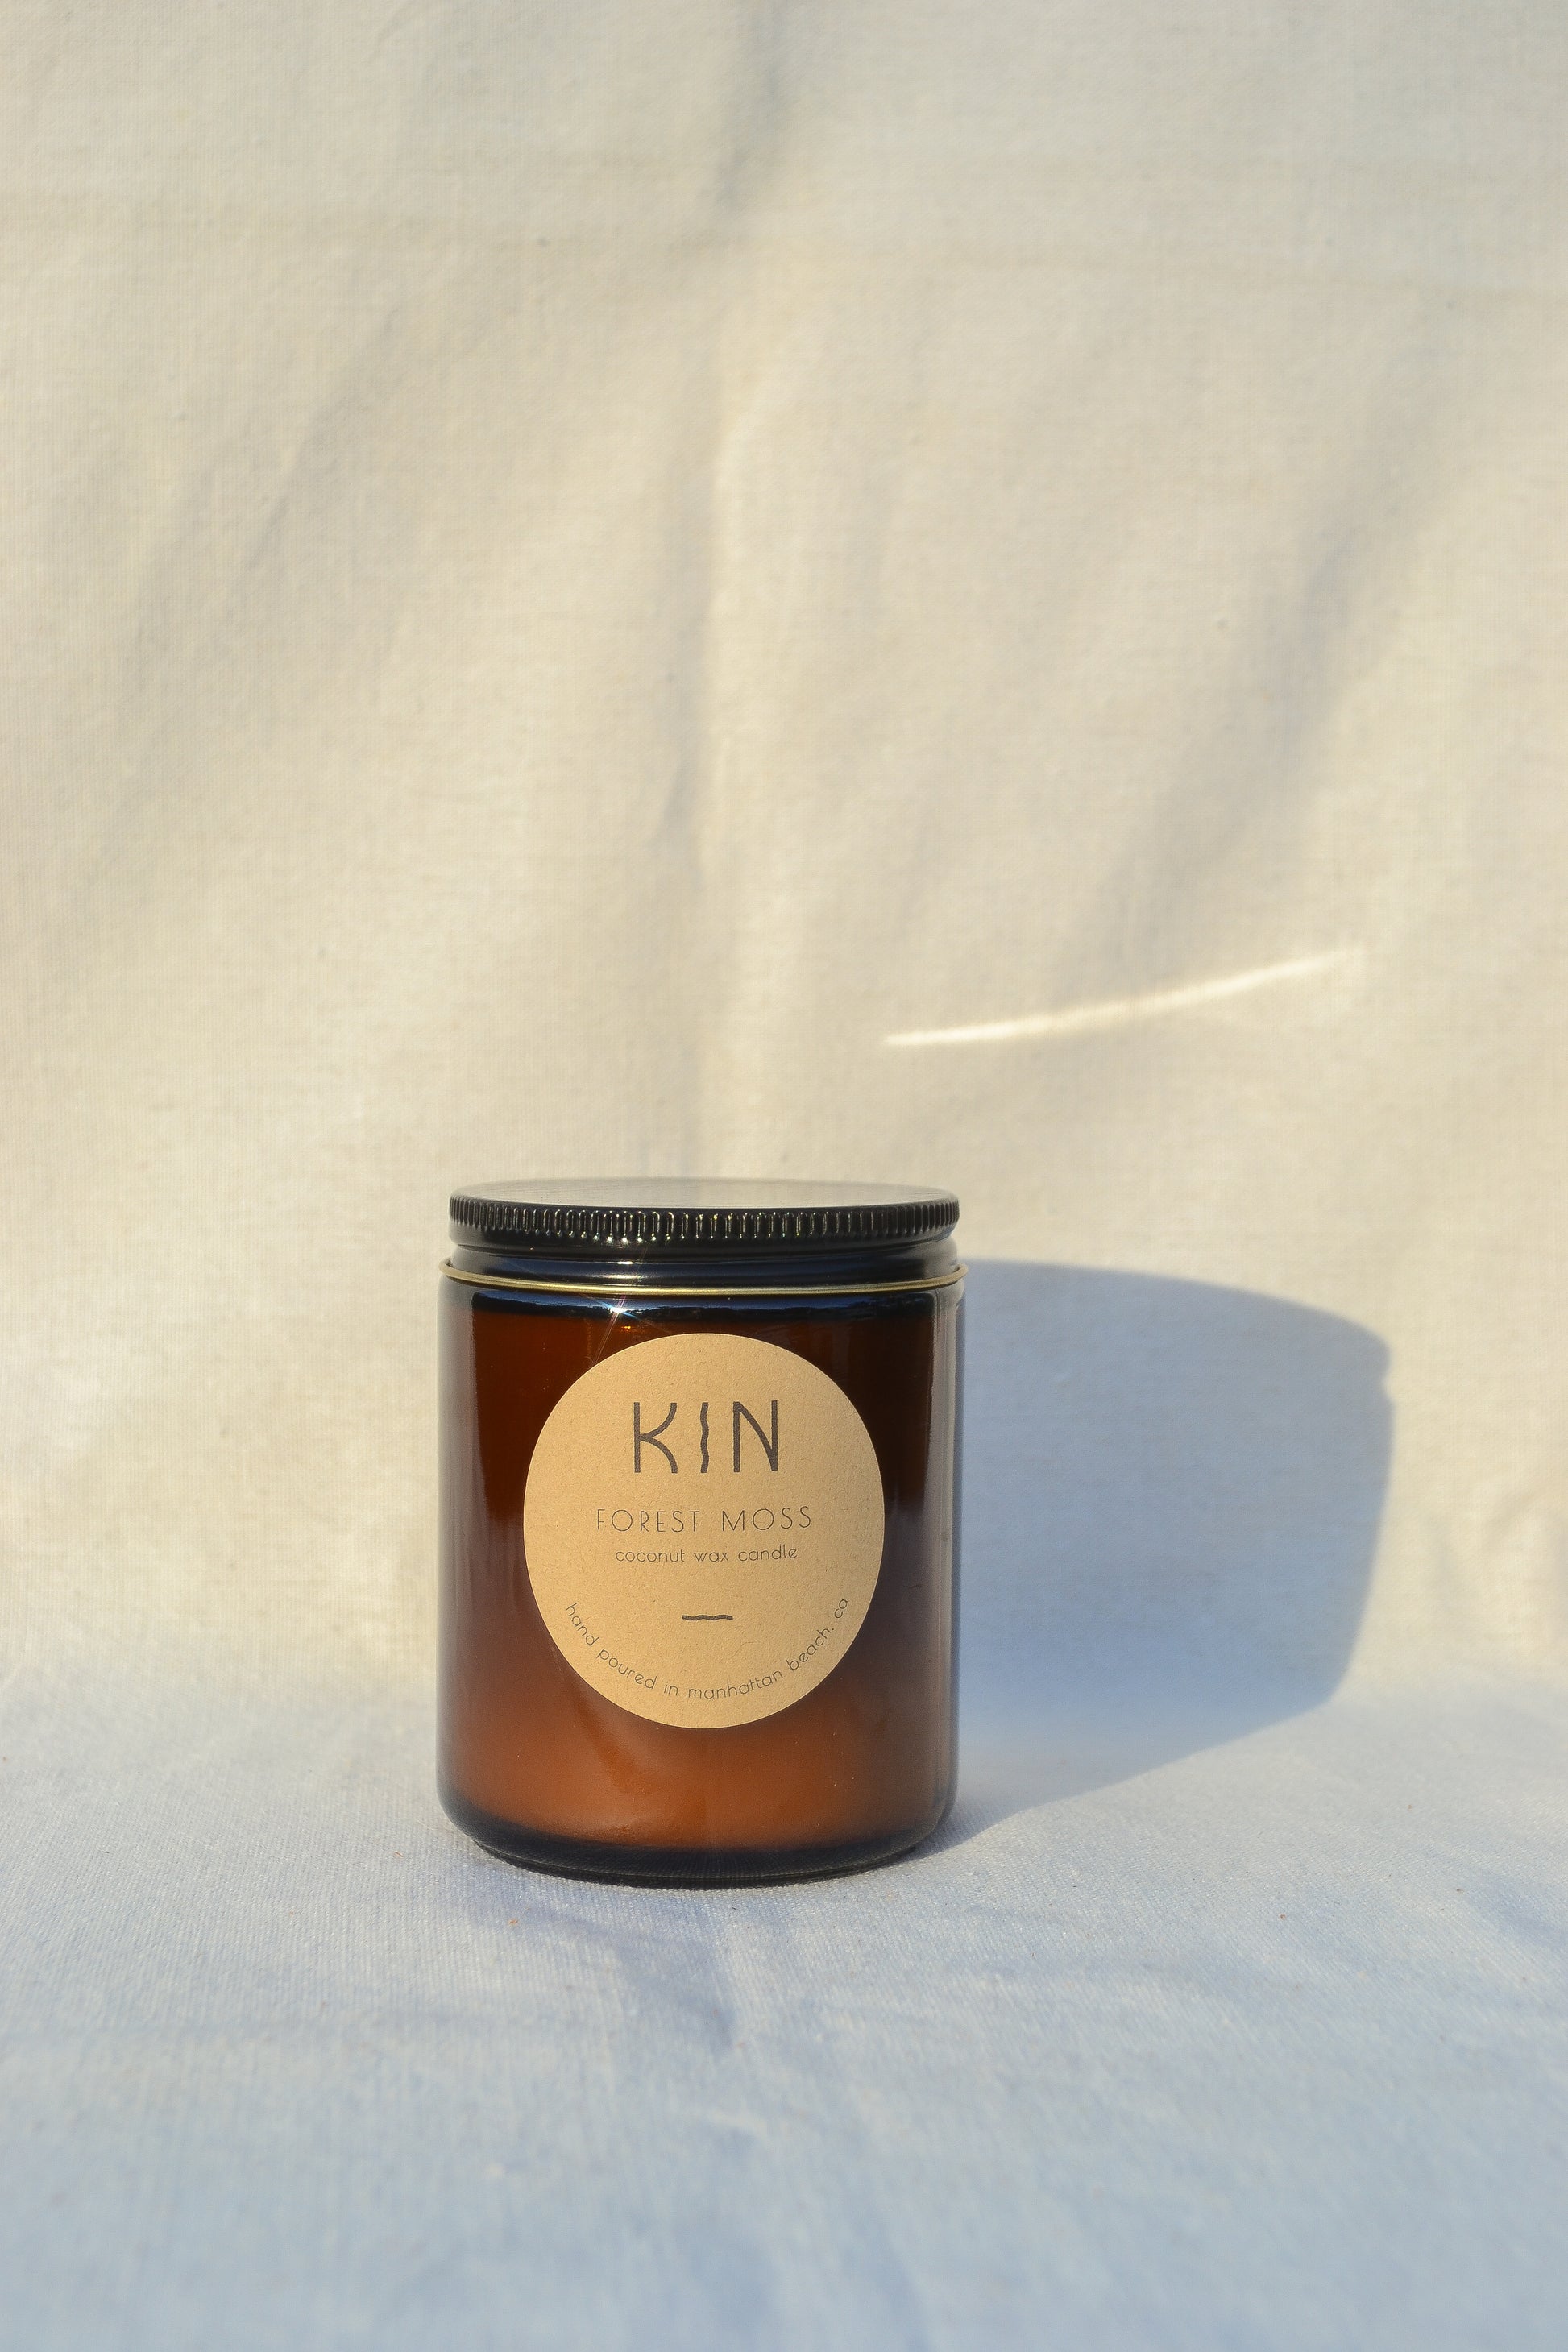 Forest Moss Candle by Kin Candle Co. Grounded and vivacious. Like wandering an earthy trail under the canopy of ancient Big Sur redwoods. This scent is a breath of fresh air, reconnecting the mind with the natural world with scent notes of Amber, Redwoods, and Citrus.